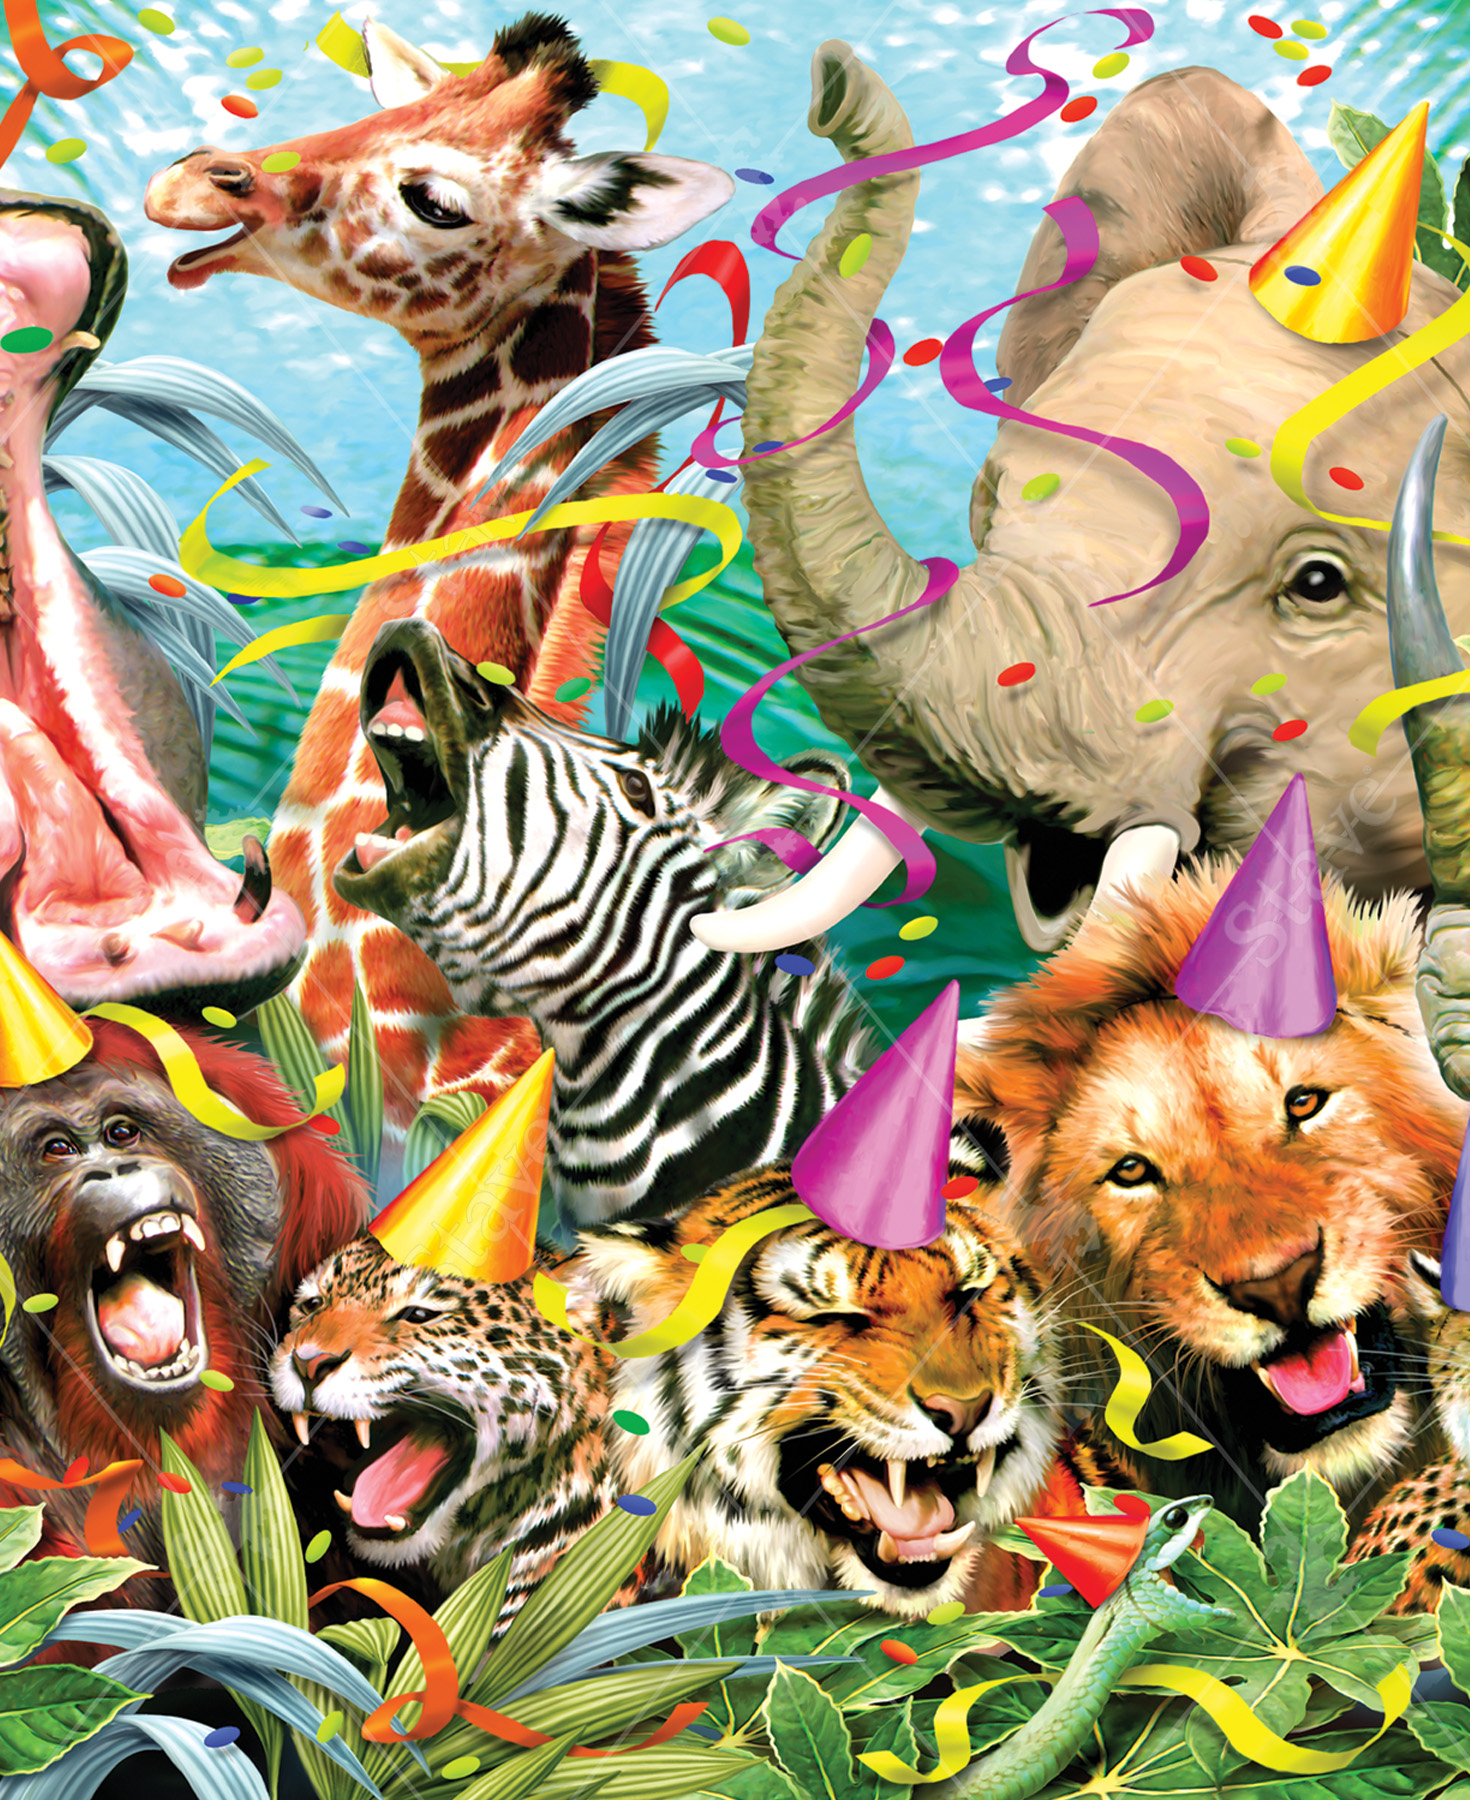 Party animals a traditional puzzle